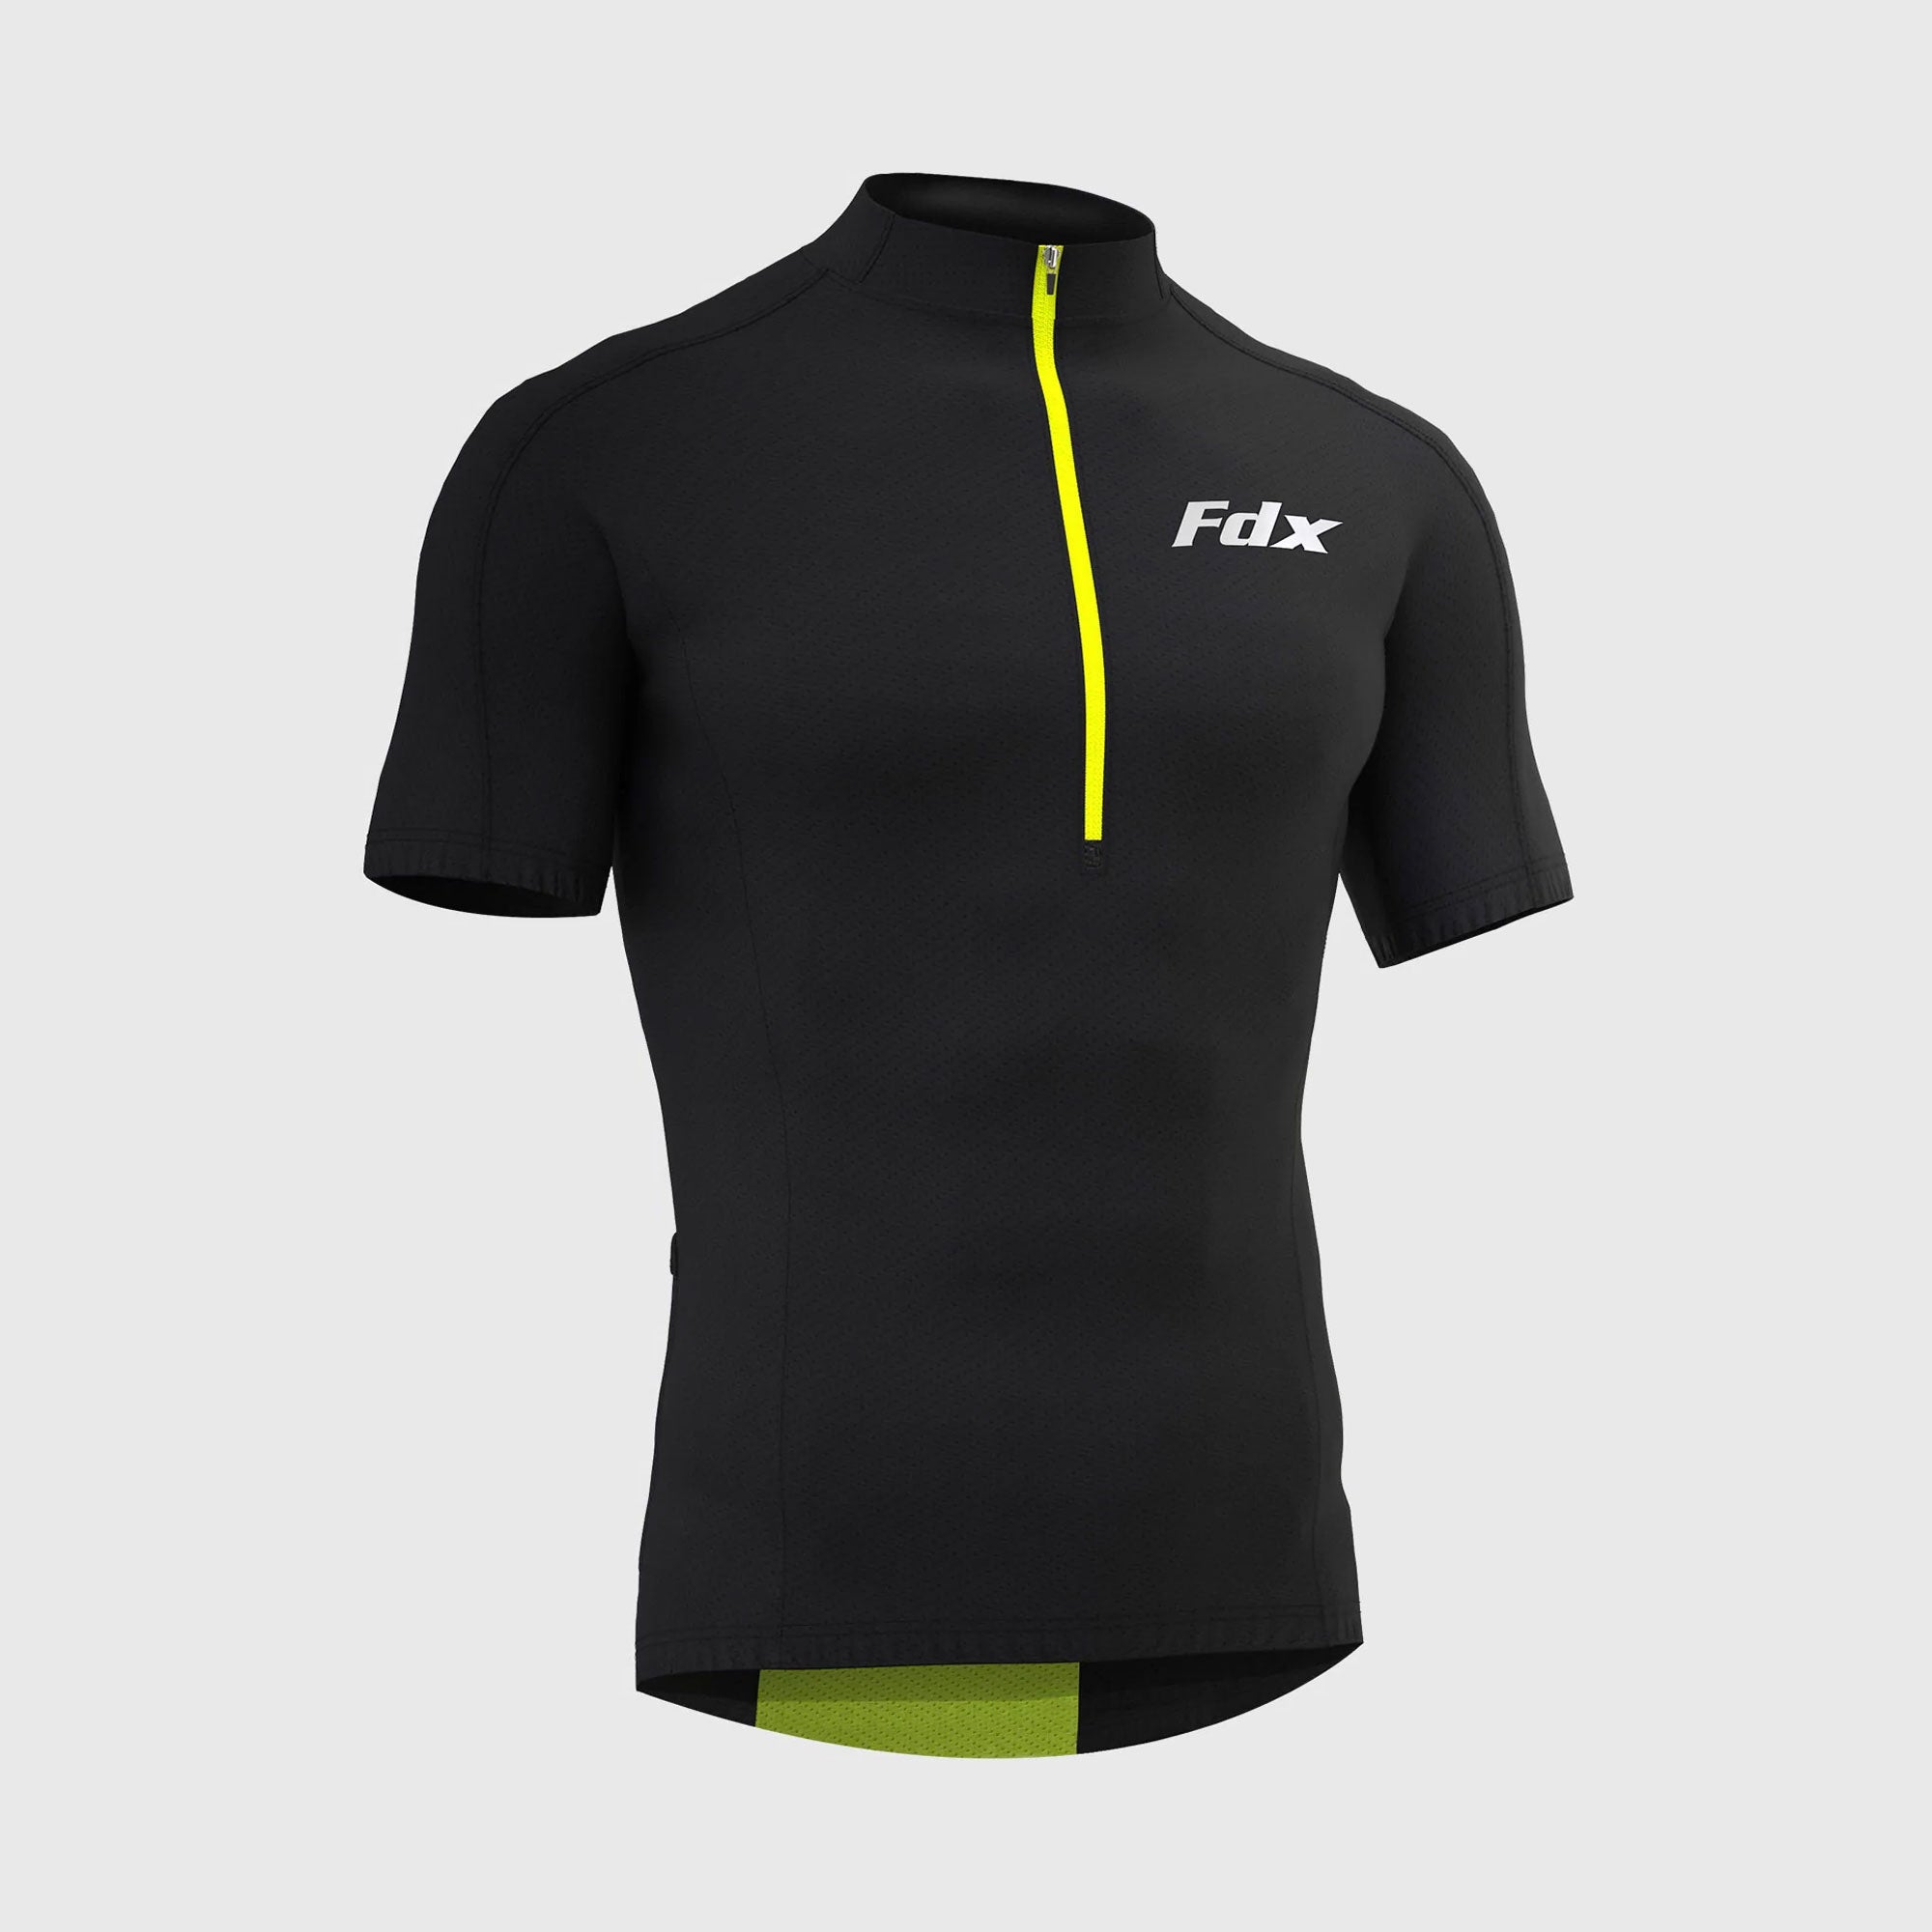  Fdx black best short sleeves men’s cycling jersey breathable lightweight hi-viz Reflective details summer biking top, full zip skin friendly half sleeves mesh cycling shirt for indoor & outdoor riding with two back & 1 zip pockets